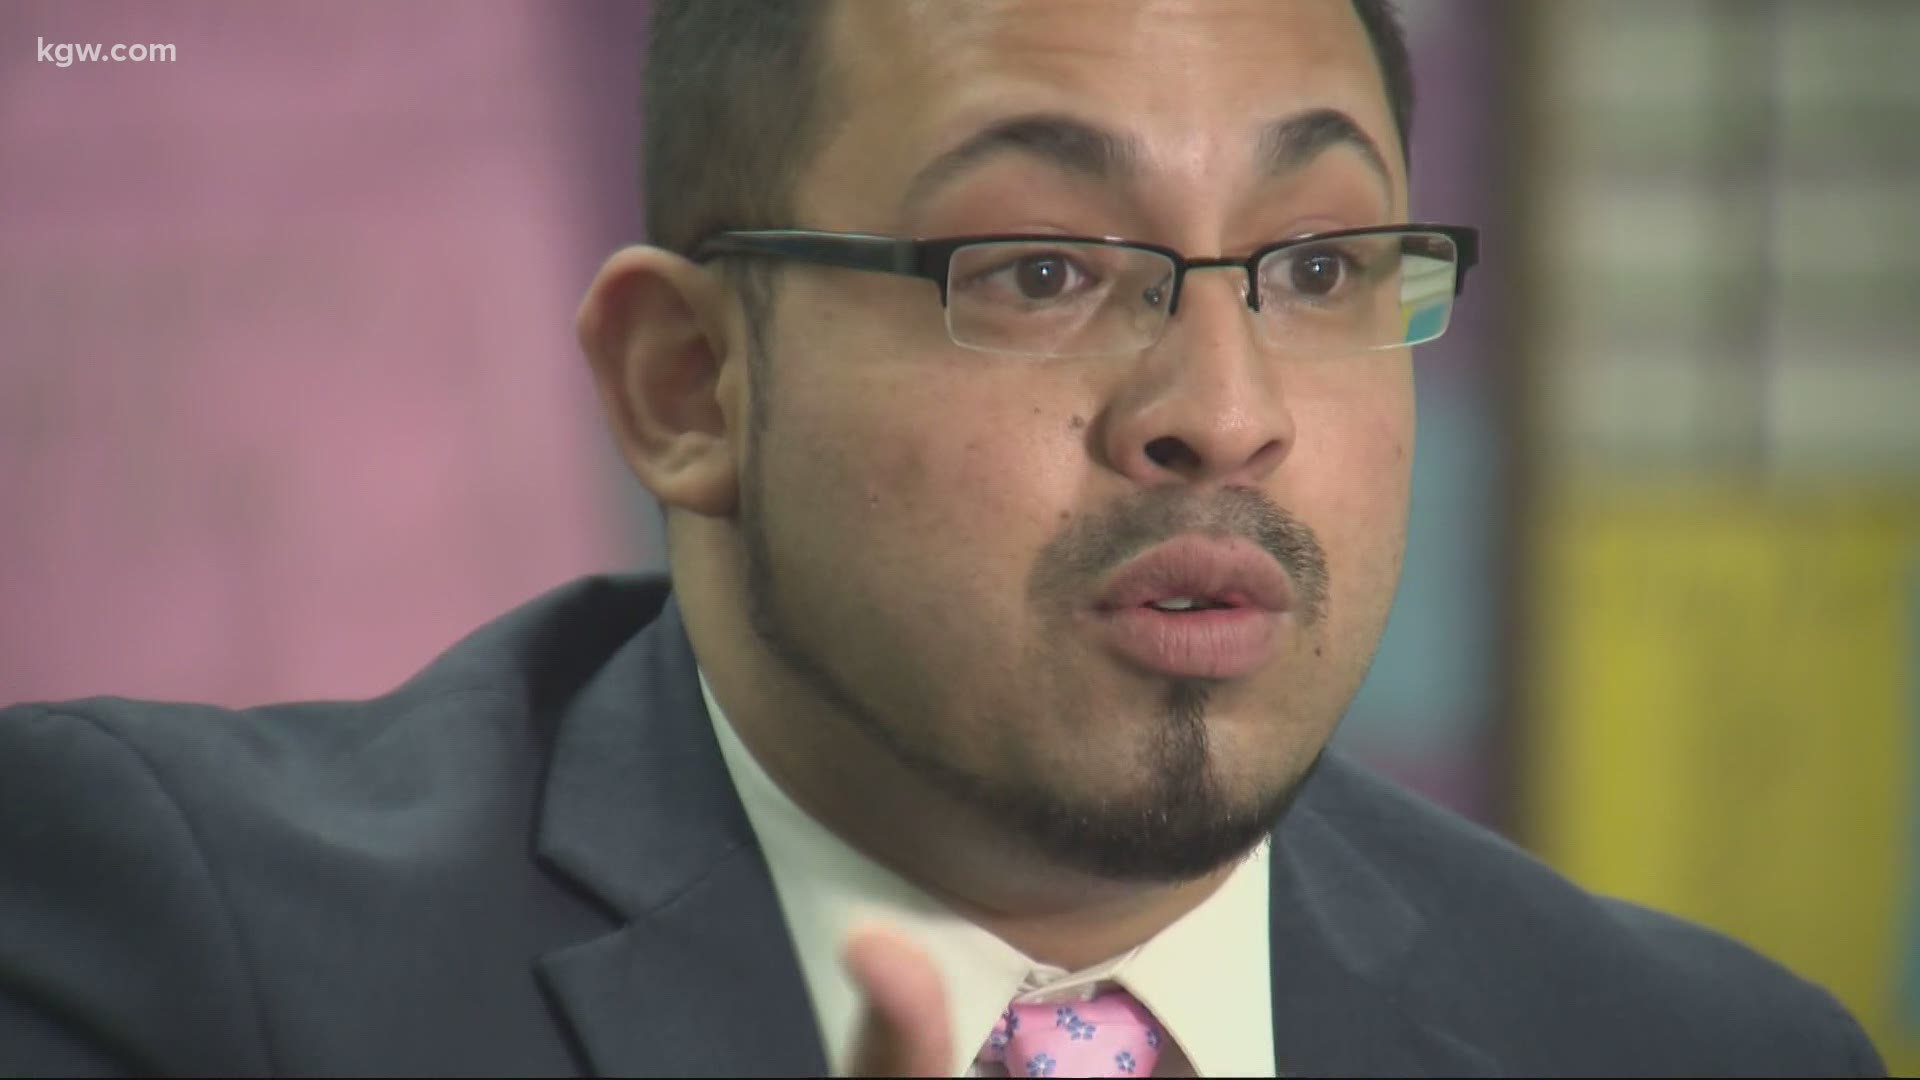 Oregon state Rep. Diego Hernandez says he is resigning. A panel of lawmakers determined he created a hostile work environment for three women.